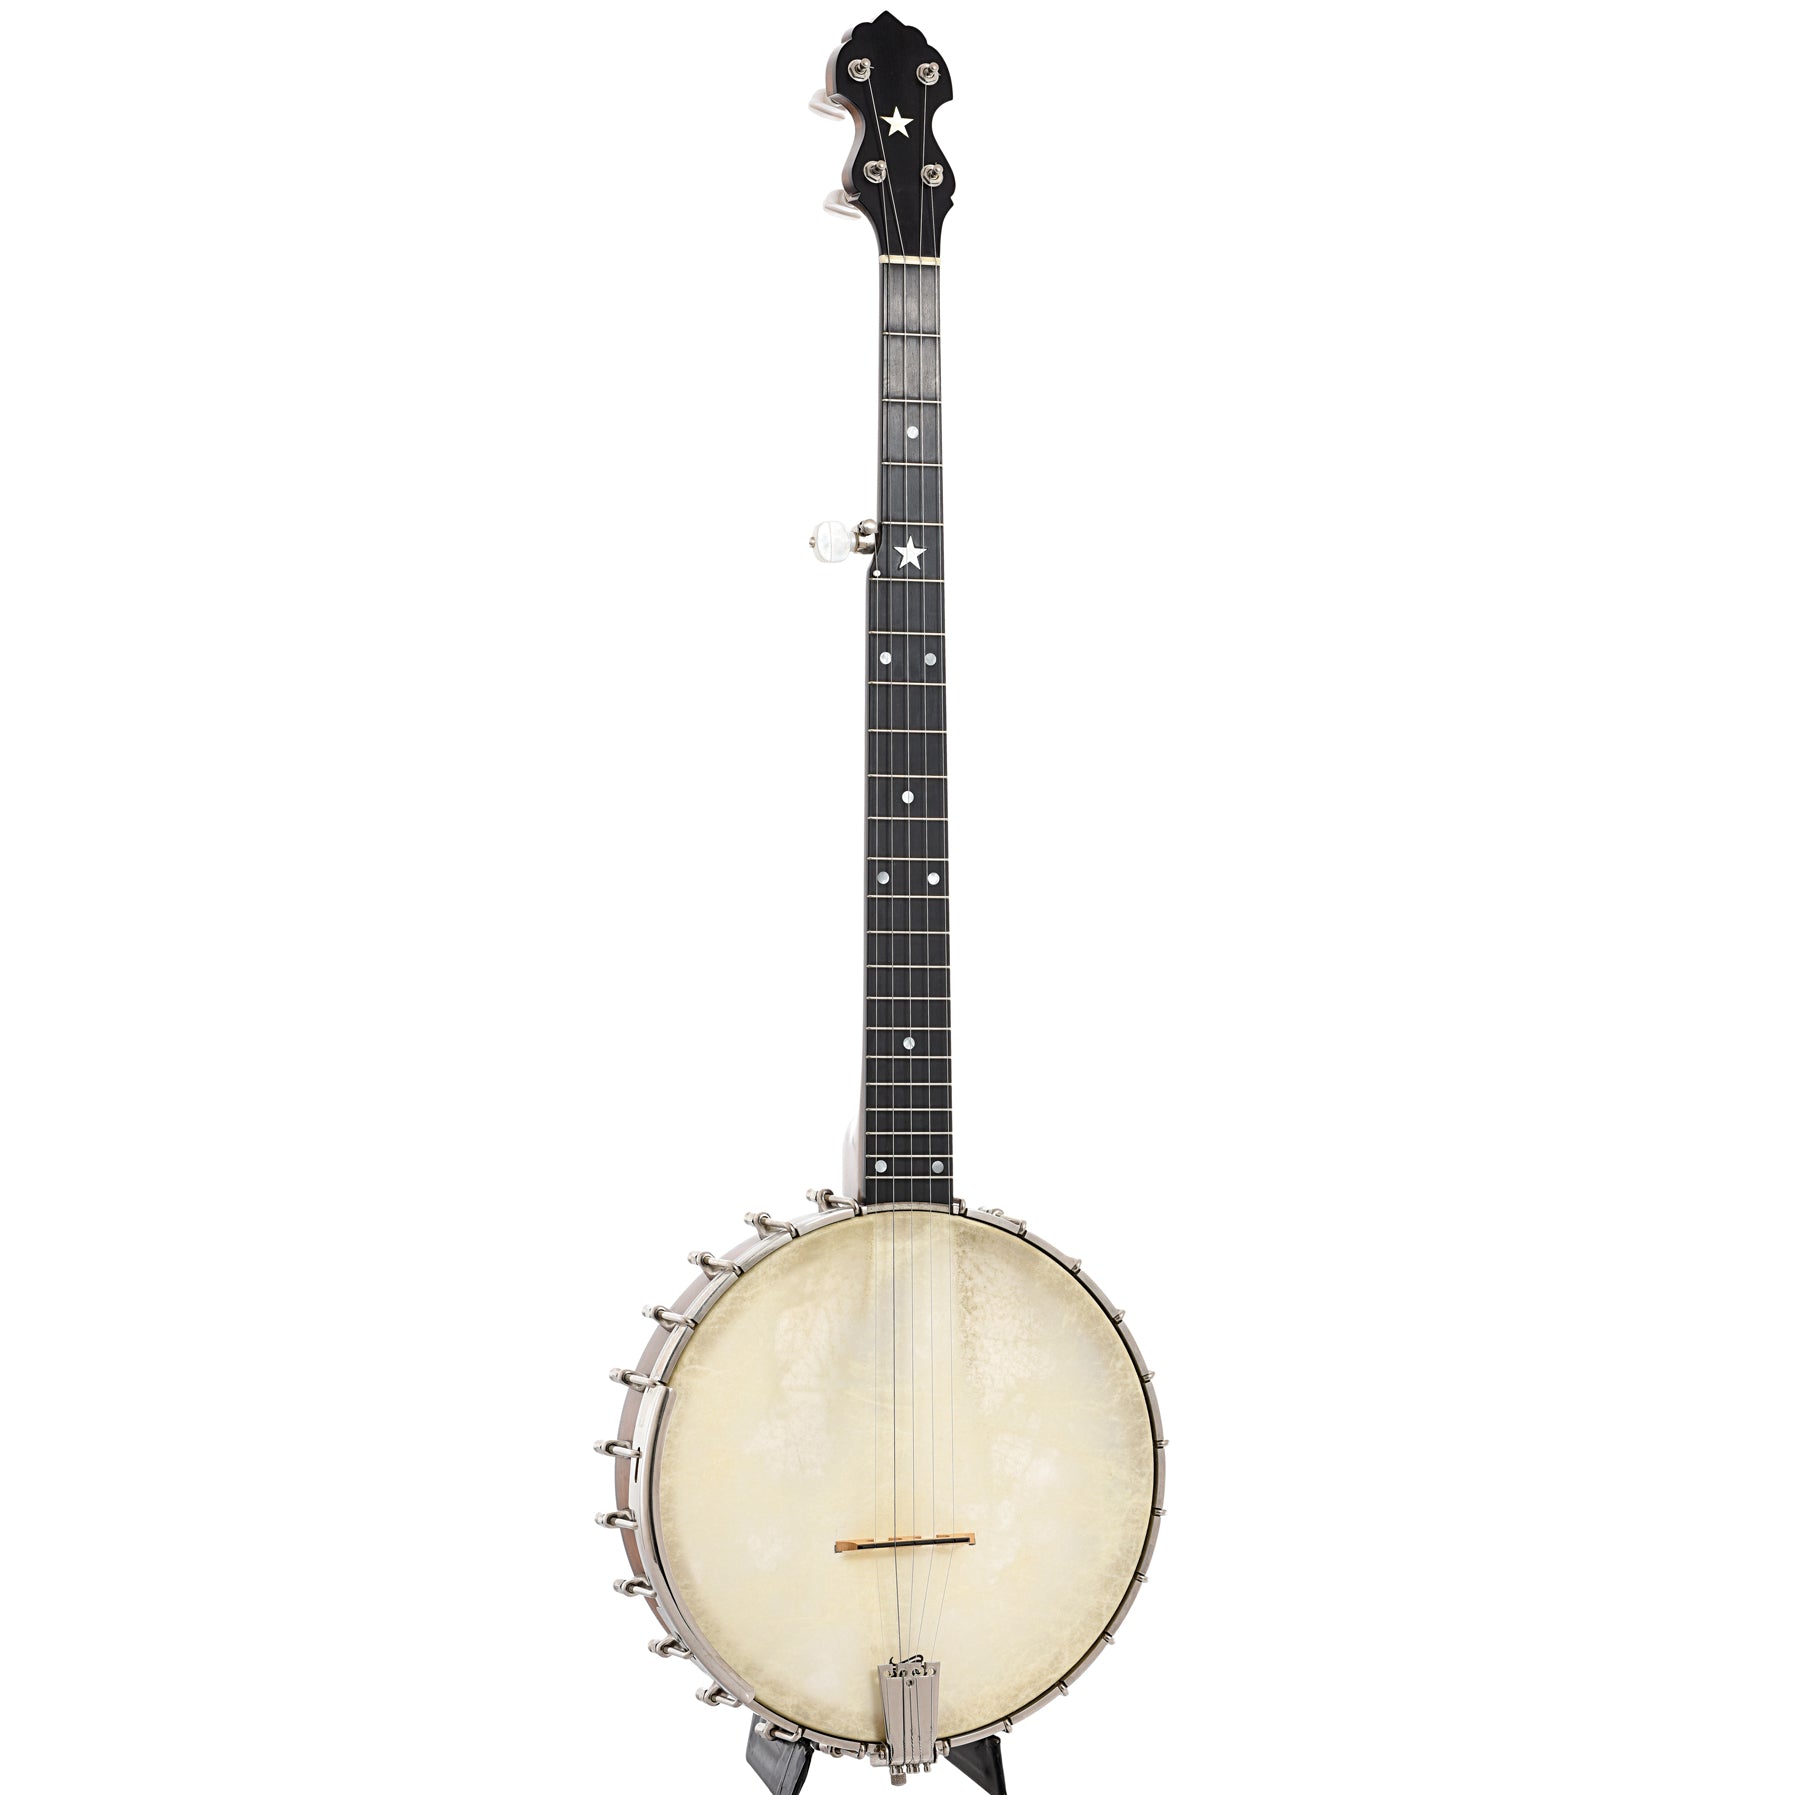 Full front and side of Bart Reiter Special Open Back Banjo